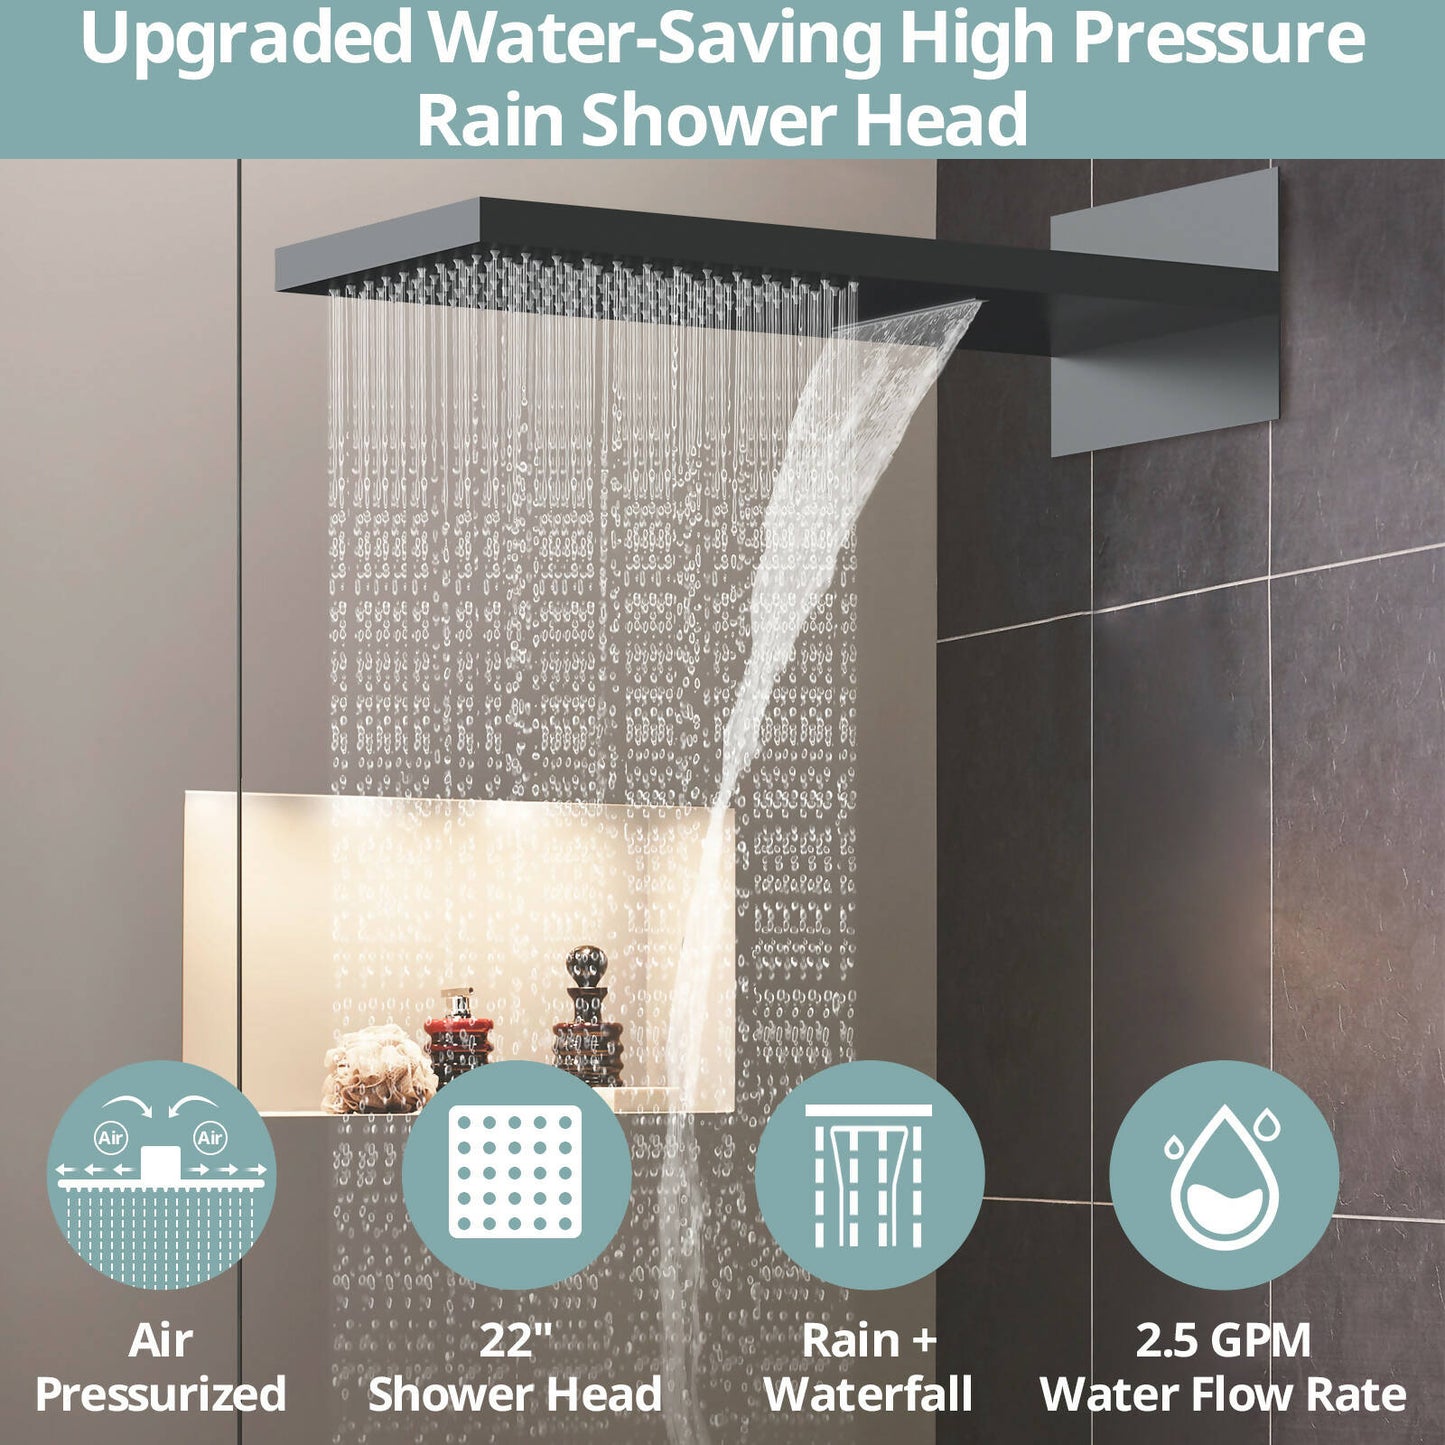 RelaxaJet 22" High-Pressure 3 Function Rainfall Shower Faucet, Wall Mount, Rough in-Valve, 2.5 GPM